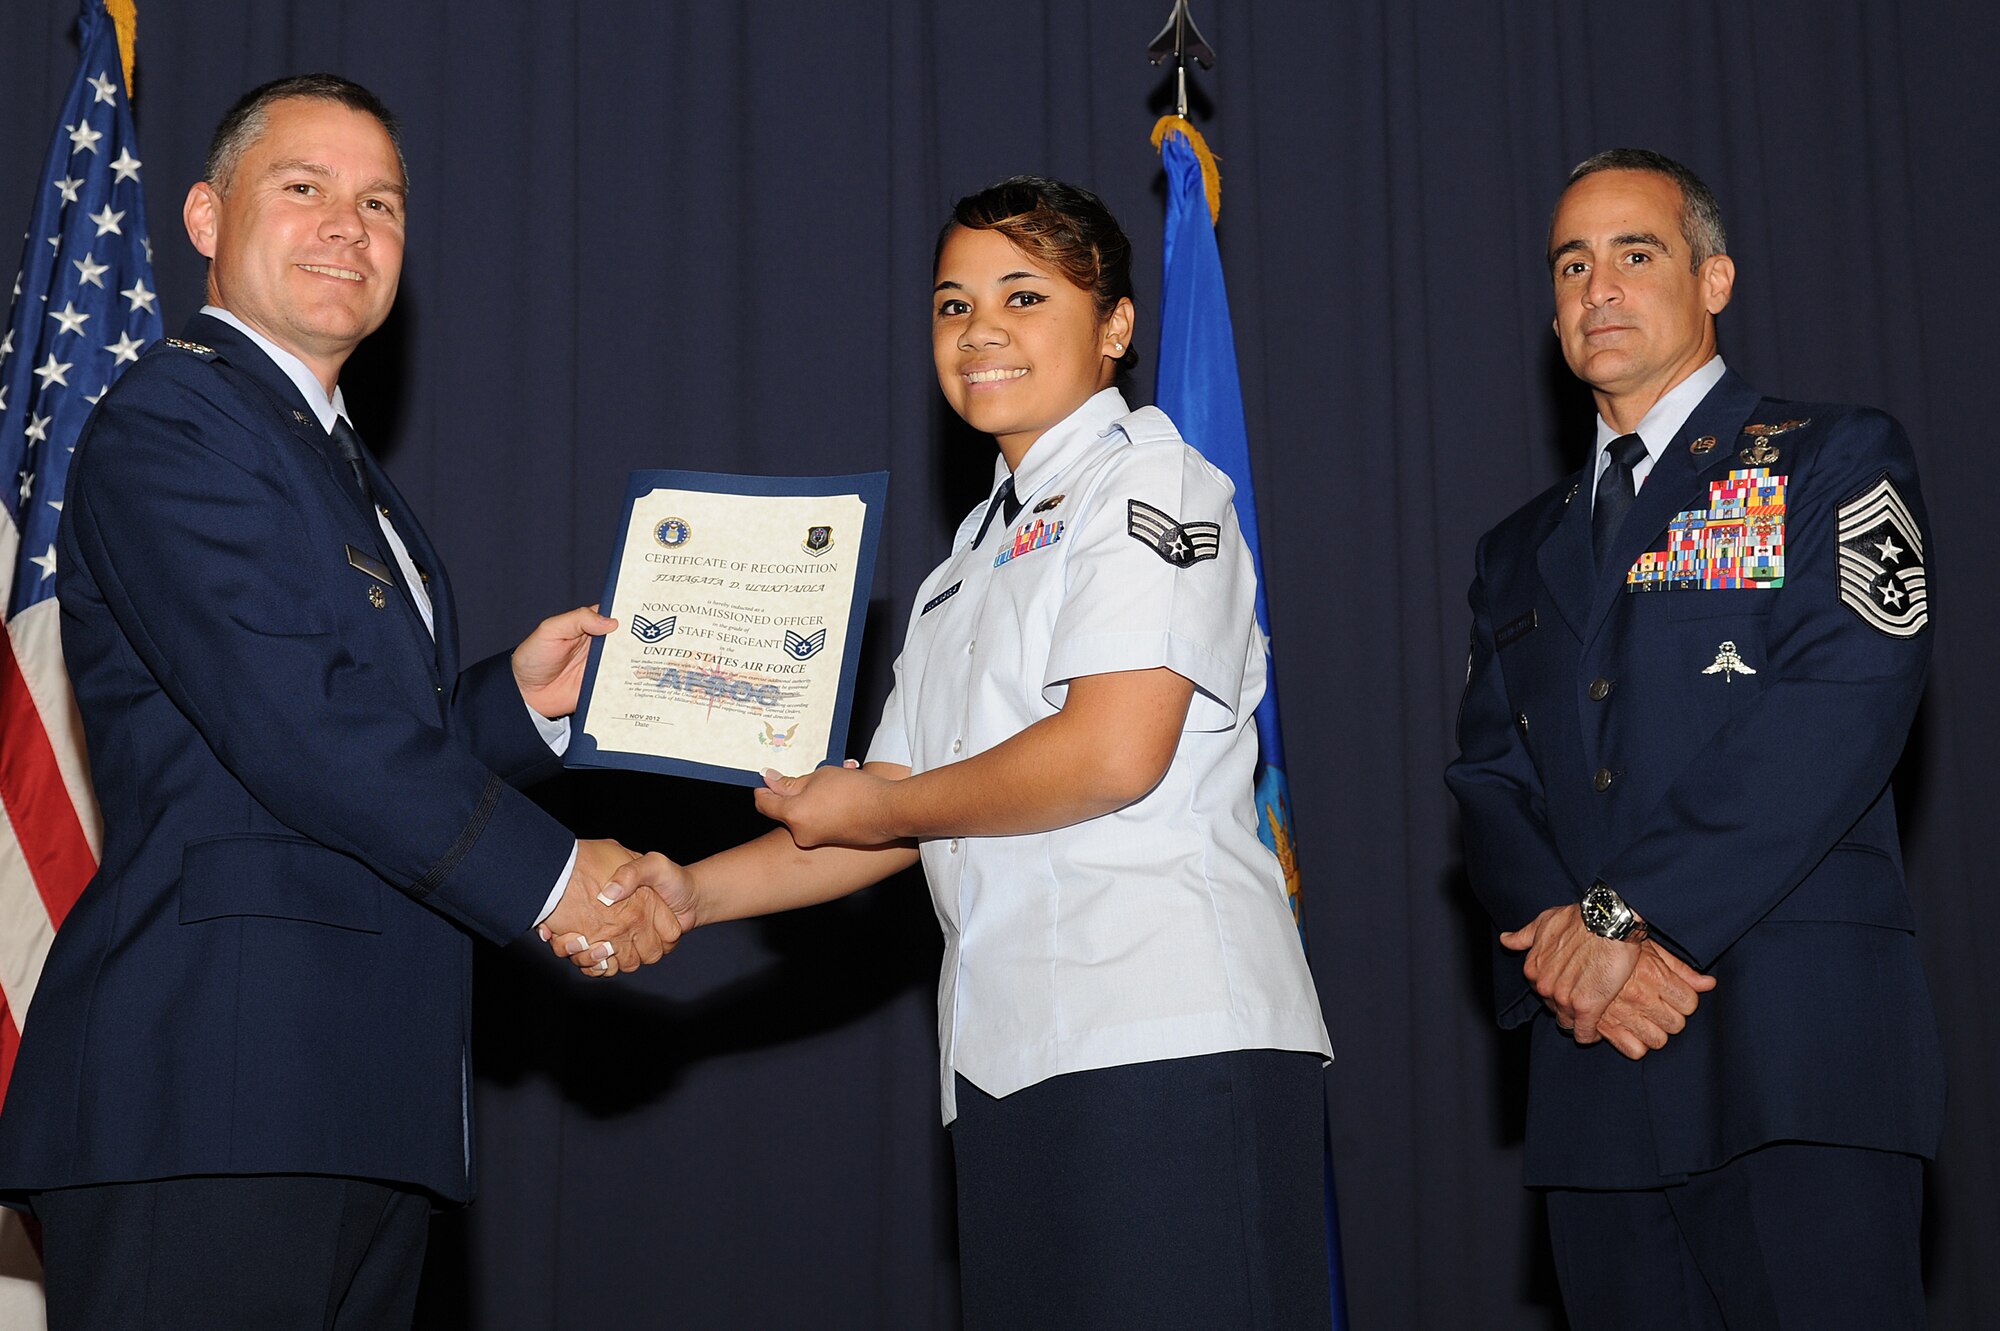 U.S. Air Force Staff Sgt. Fiatagata Ulukivaiola, a formal training technician with 1st Special Operations Force Support Squadron, accepts her promotion certificate from Col. William Holt, vice commander of 1st Special Operations Wing, during an NCO recognition ceremony at the King Auditorium on Hurlburt Field, Fla., Oct. 30, 2012. Holt emphasized the importance of increased responsibilities, including Airmen taking care of each other. (U.S. Air Force Photo/Airman 1st Class Michelle Vickers)